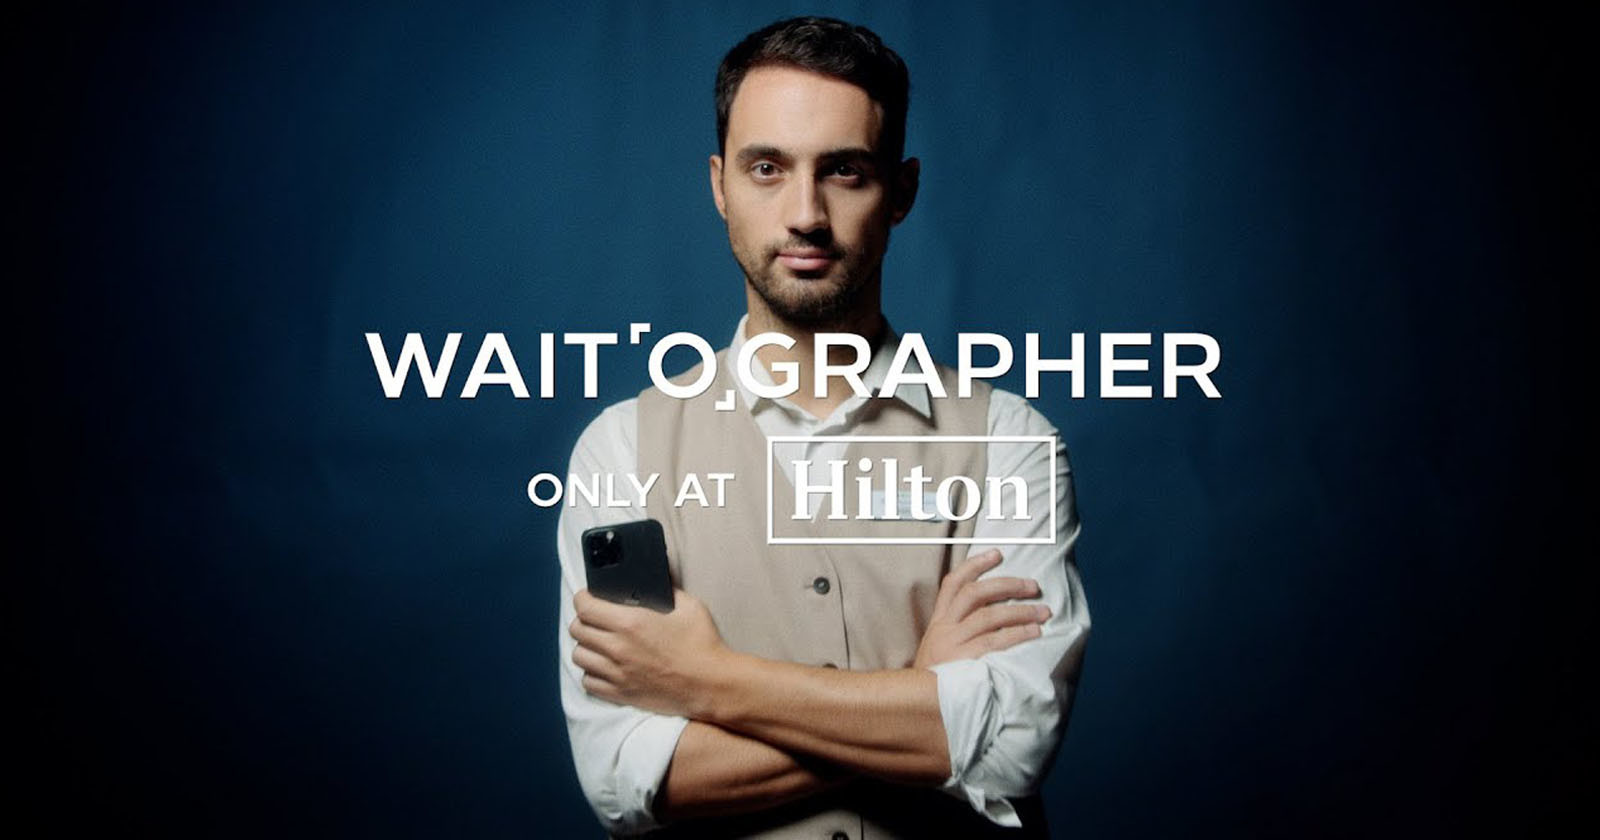 Hilton Trains Waiters in Photography, Calls them Waitographers